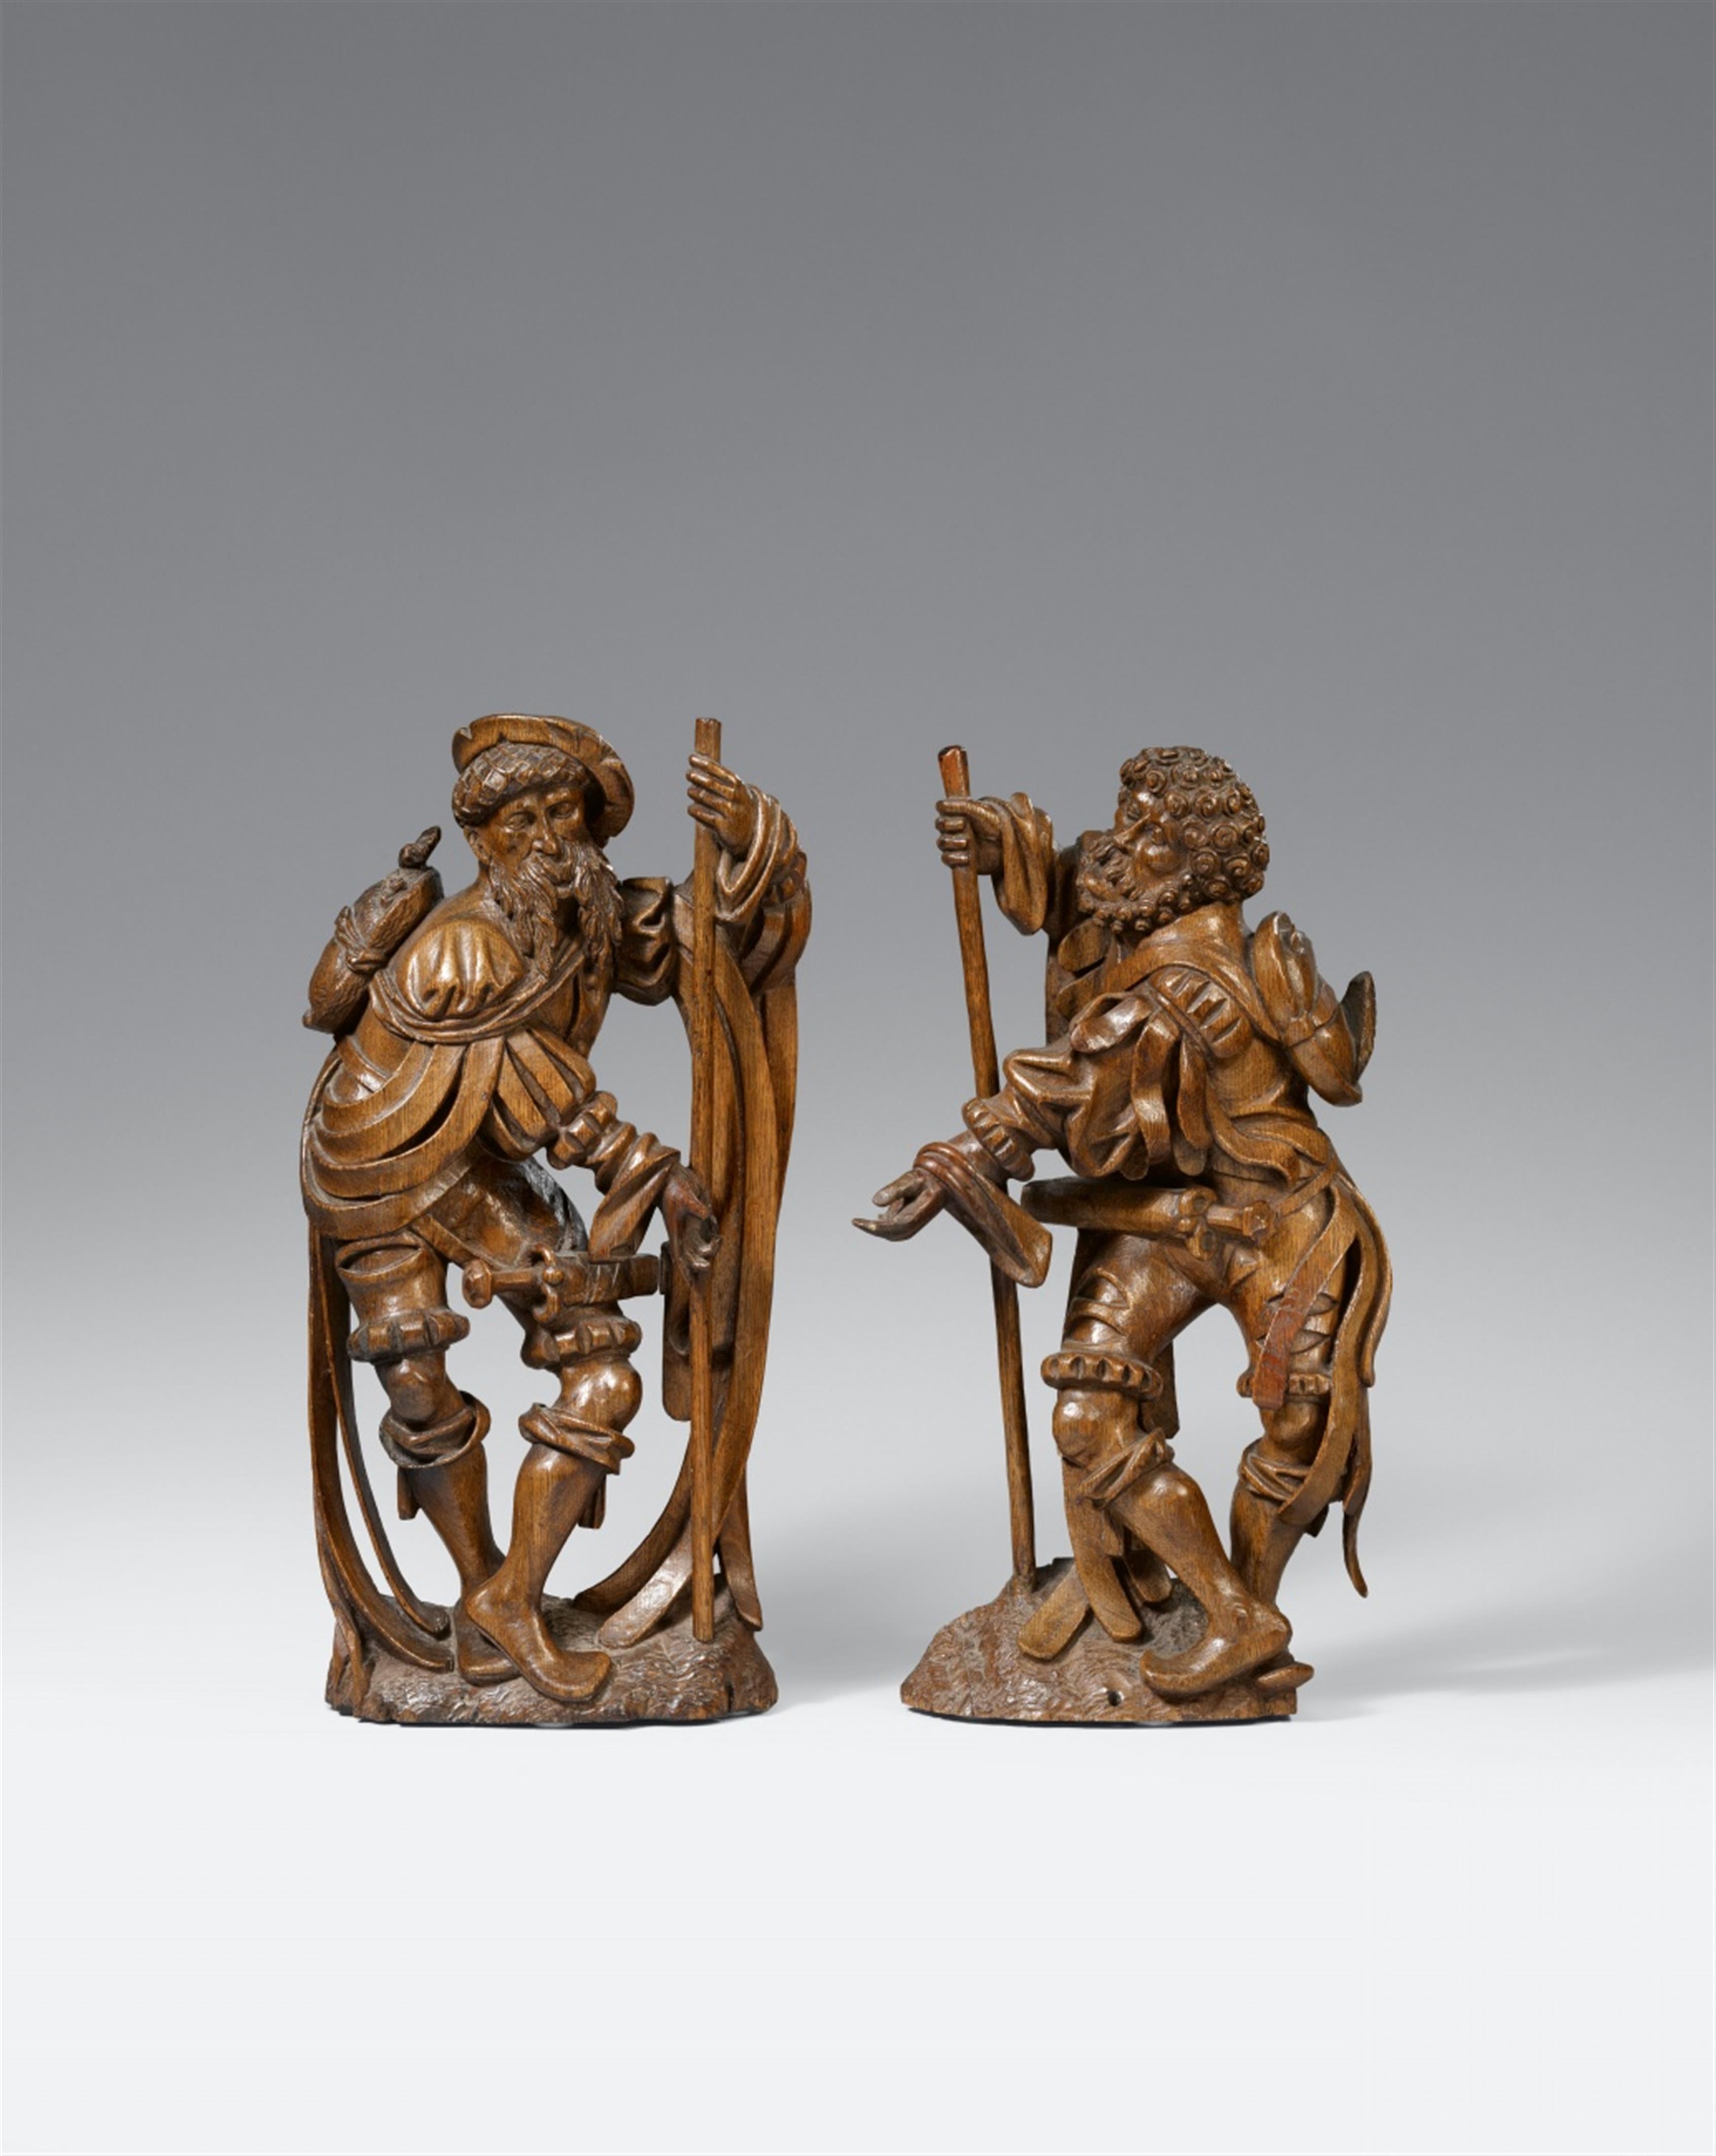 Antwerp, circa 1510/1520 - Two carved oak figures of soldiers from a Passion Altarpiece, Antwerp, circa 1510/1520 - image-1